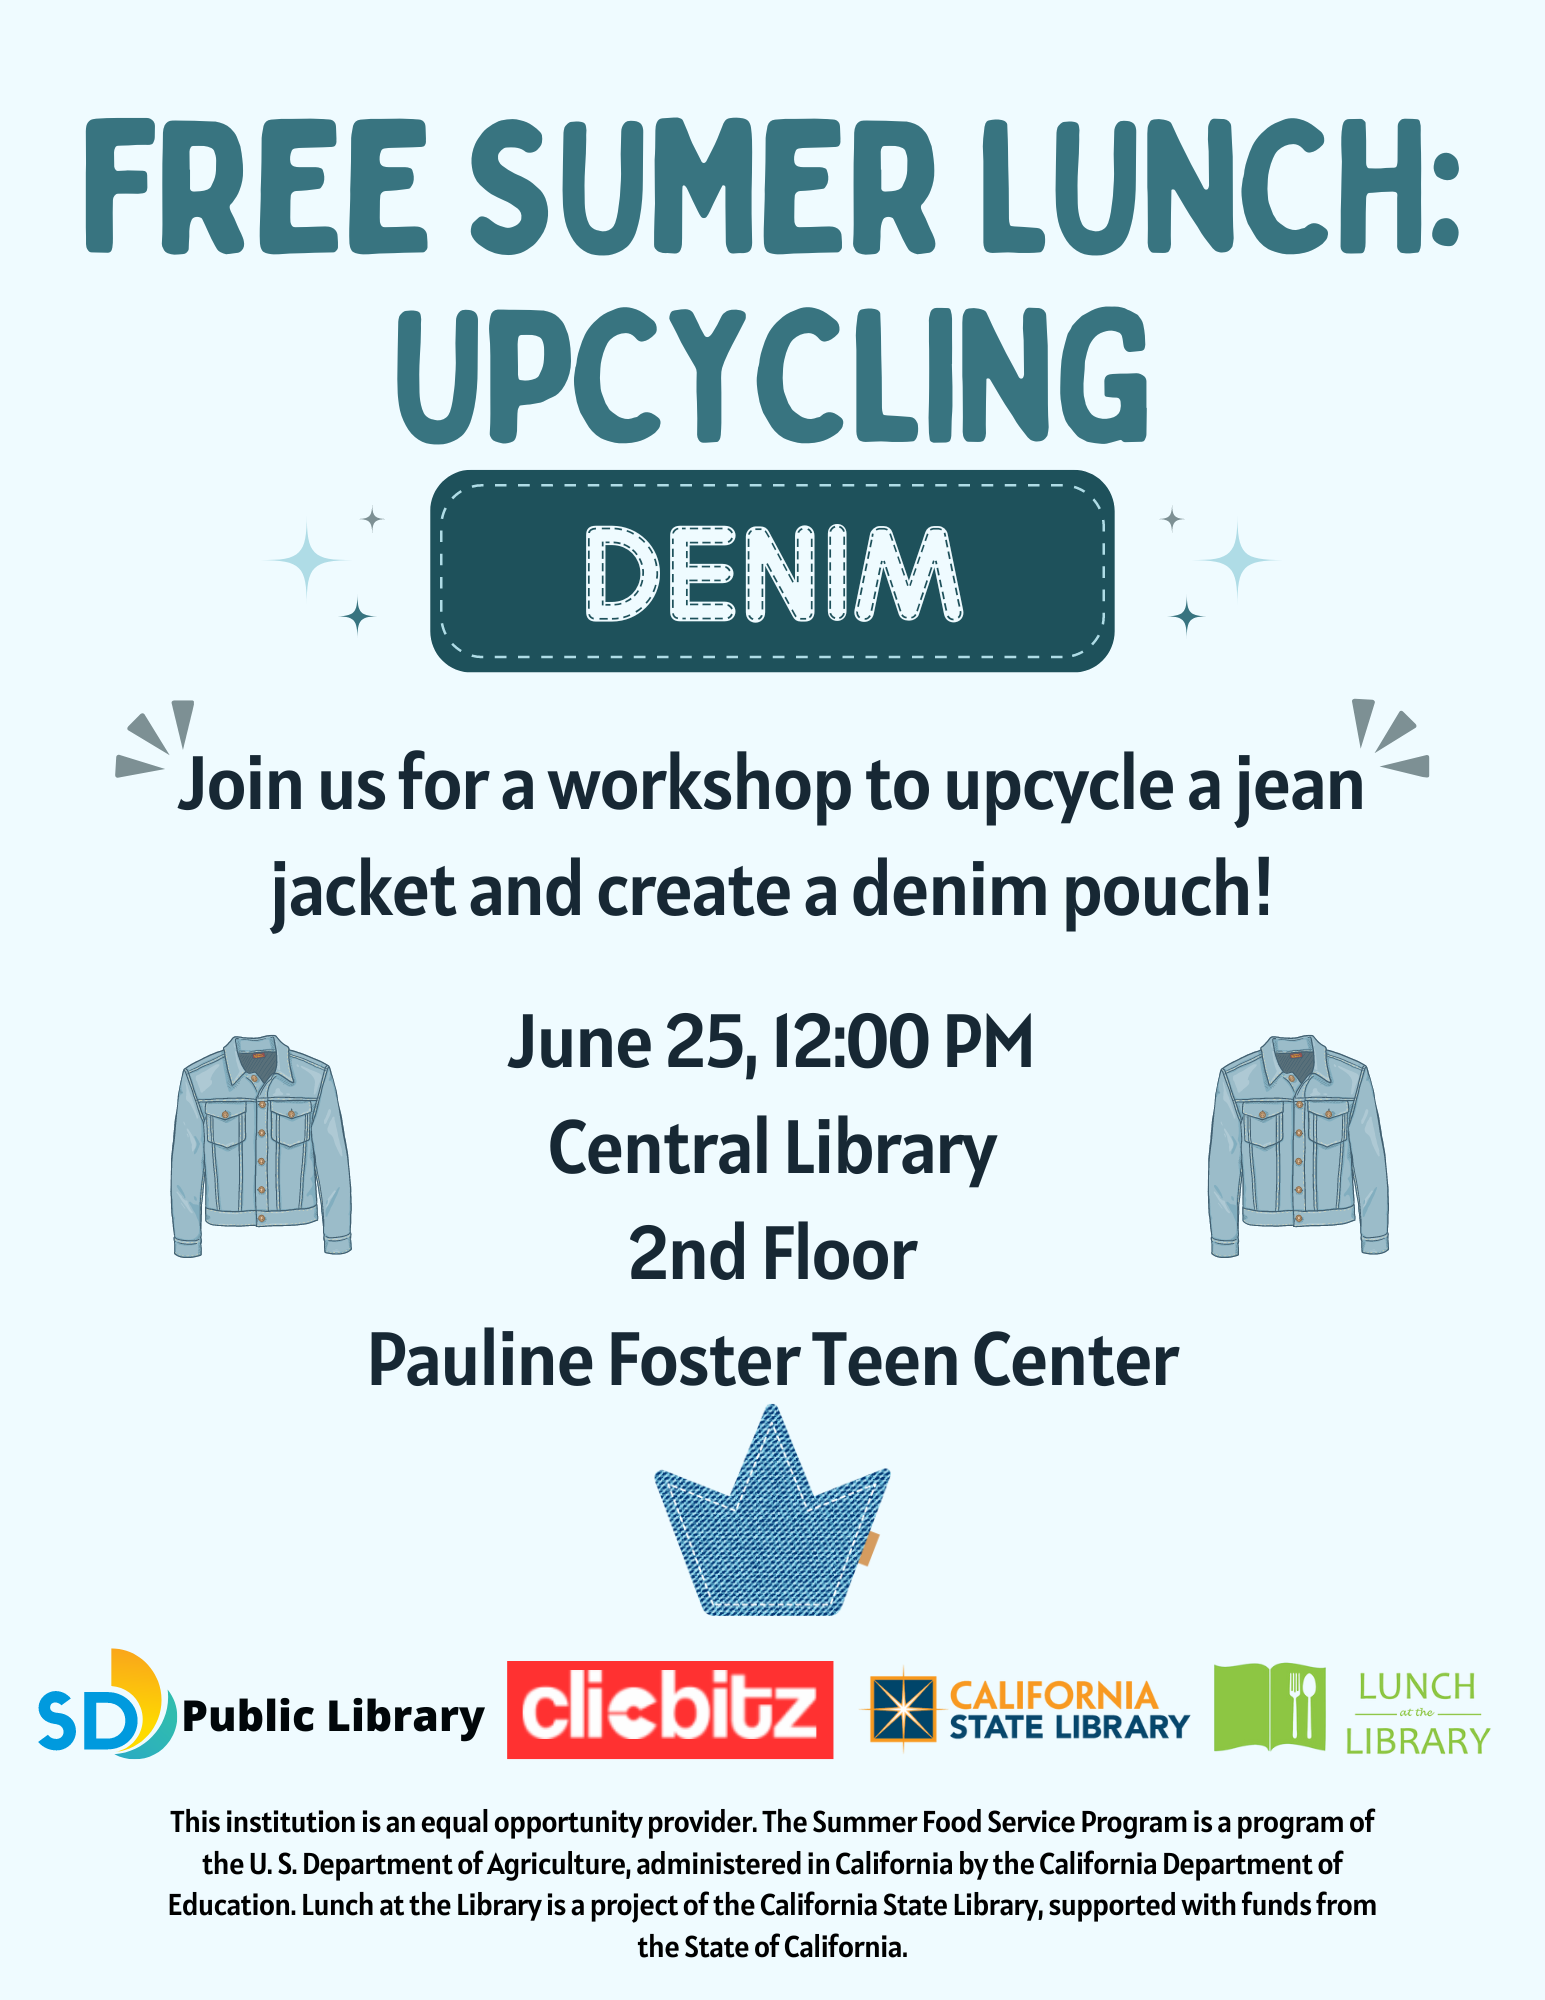 Free sumer lunch: upcycling Denim. Join us for a workshop to upcycle a jean jacket and create a denim pouch! June 25, 12:00 PM Central Library 2nd Floor Pauline Foster Teen Center. This institution is an equal opportunity provider. The Summer Food Service Program is a program of the U. S. Department of Agriculture, administered in California by the California Department of Education. Lunch at the Library is a project of the California State Library, supported with funds from the State of California.